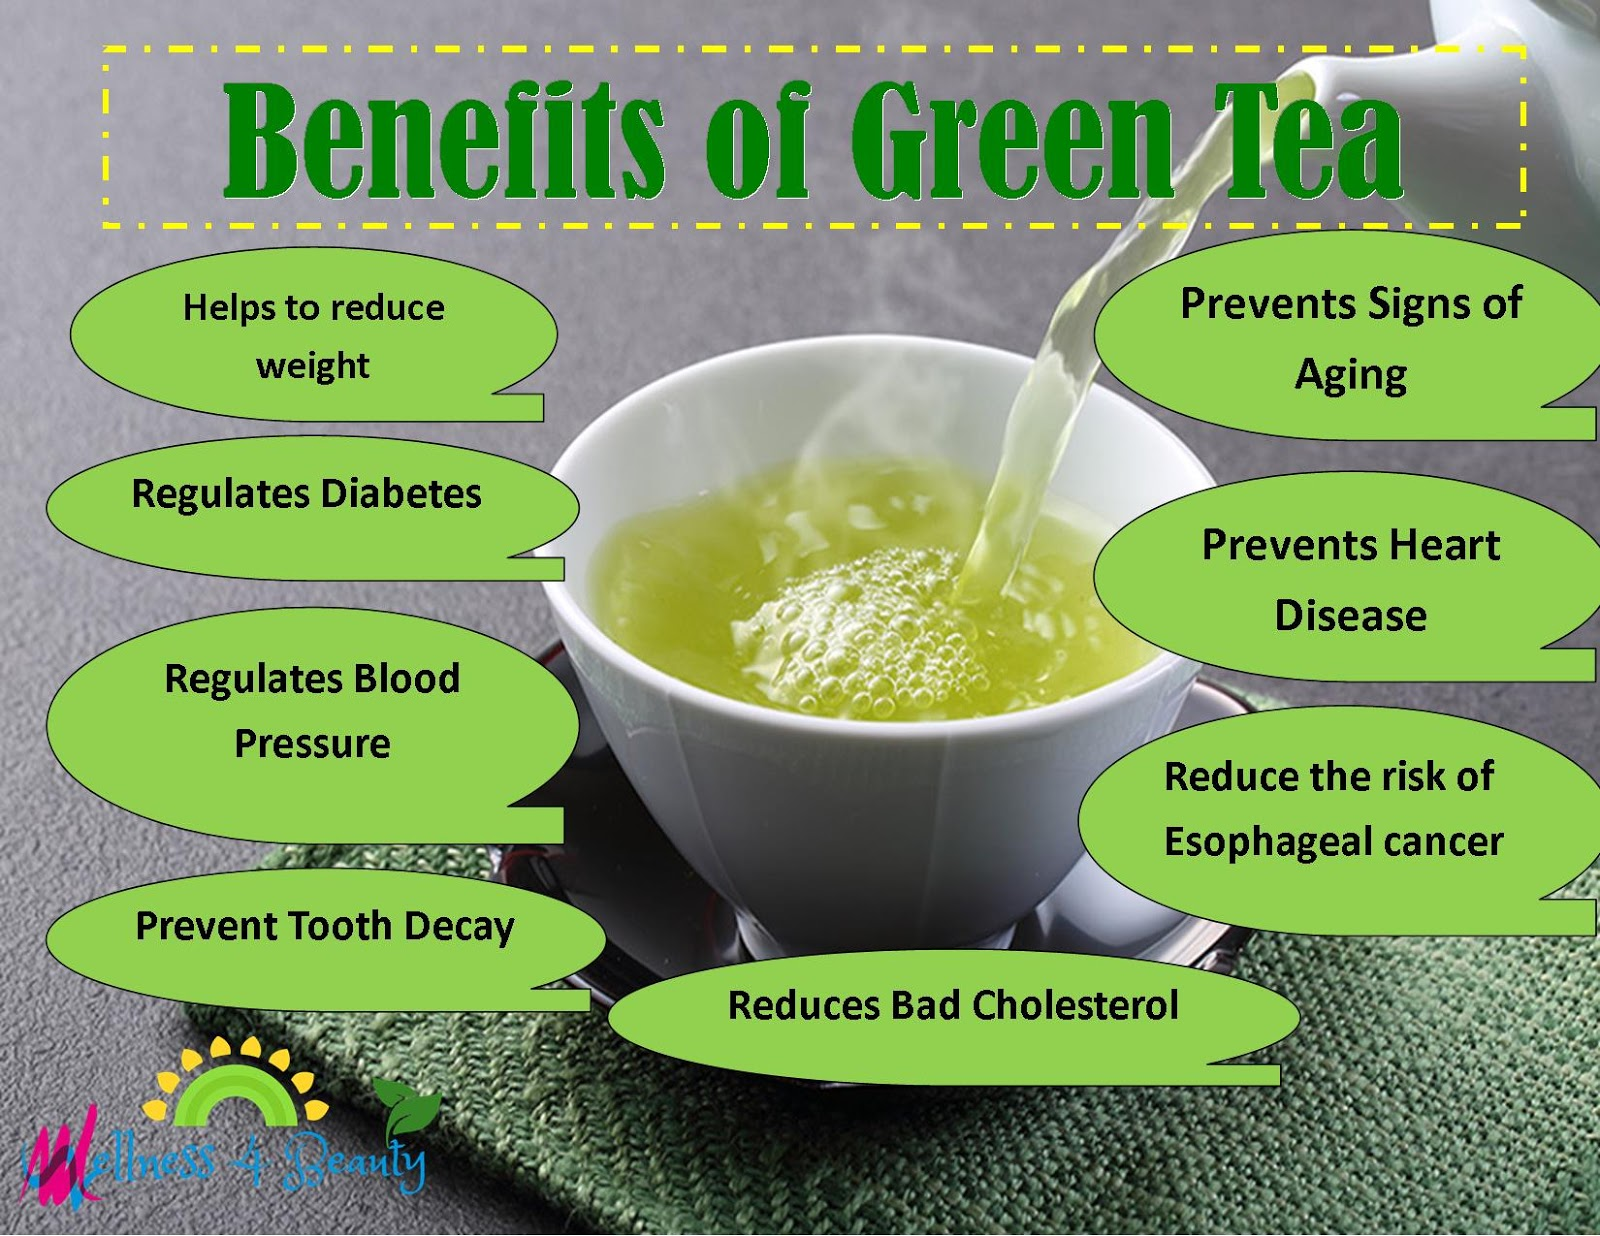 Beyond the Steaming Cup:The Remarkable Benefits of Green Tea